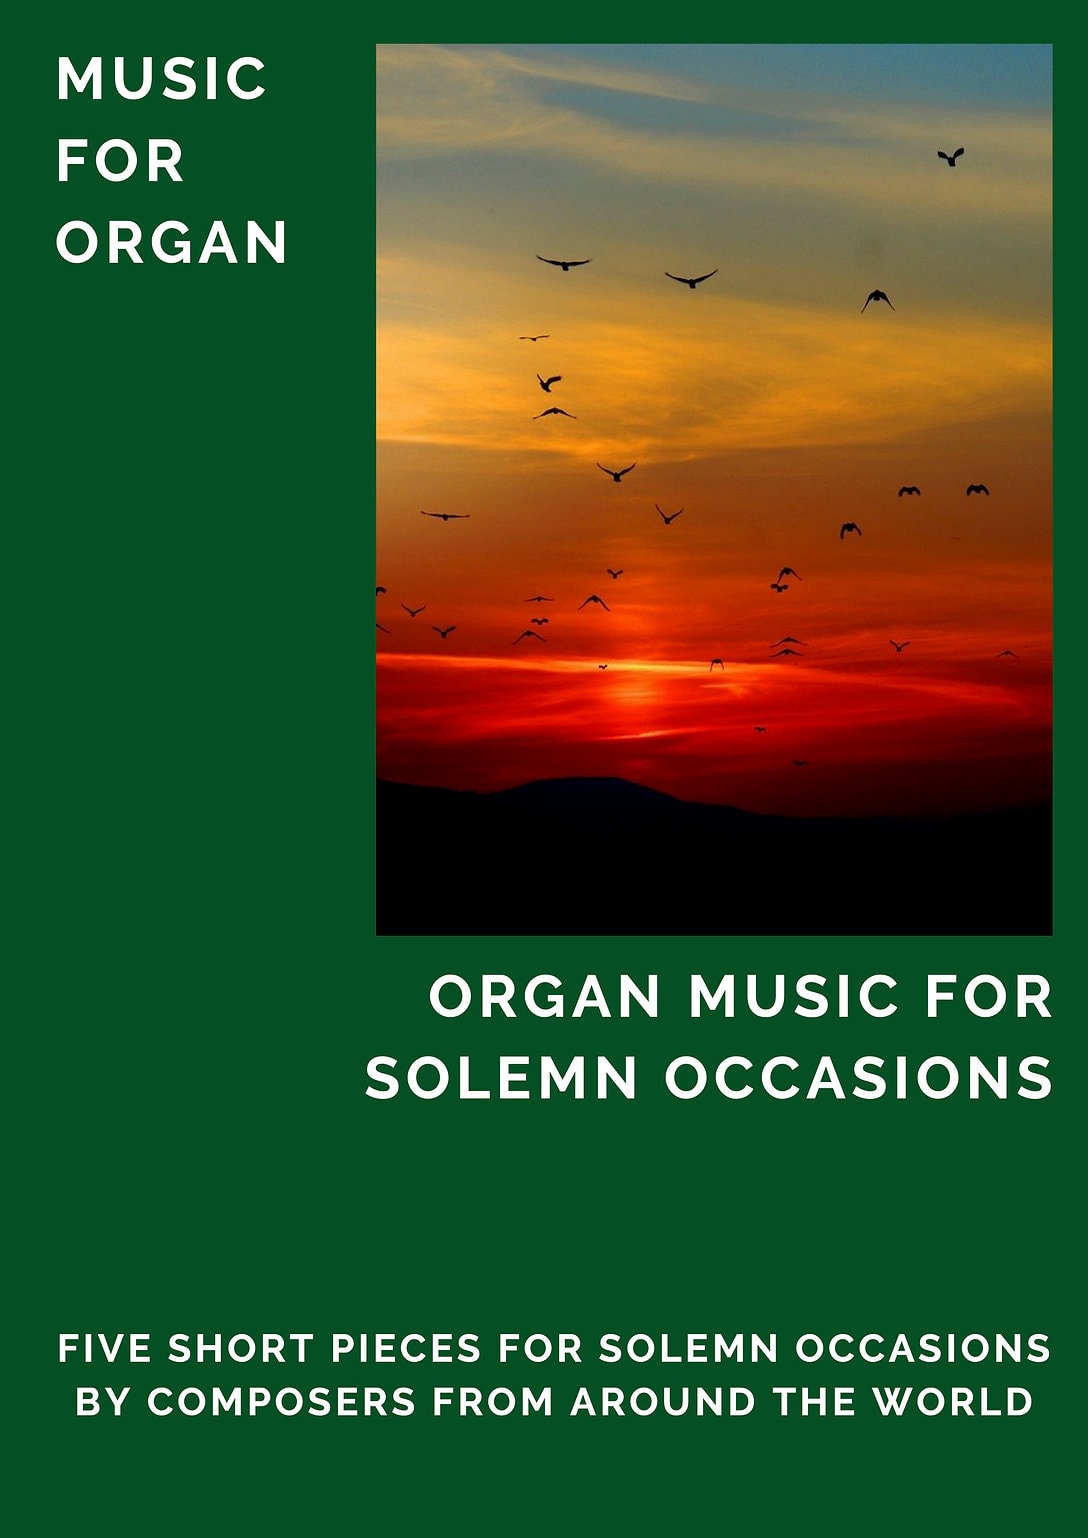 Organ Music for Solemn Occasions published by Knight